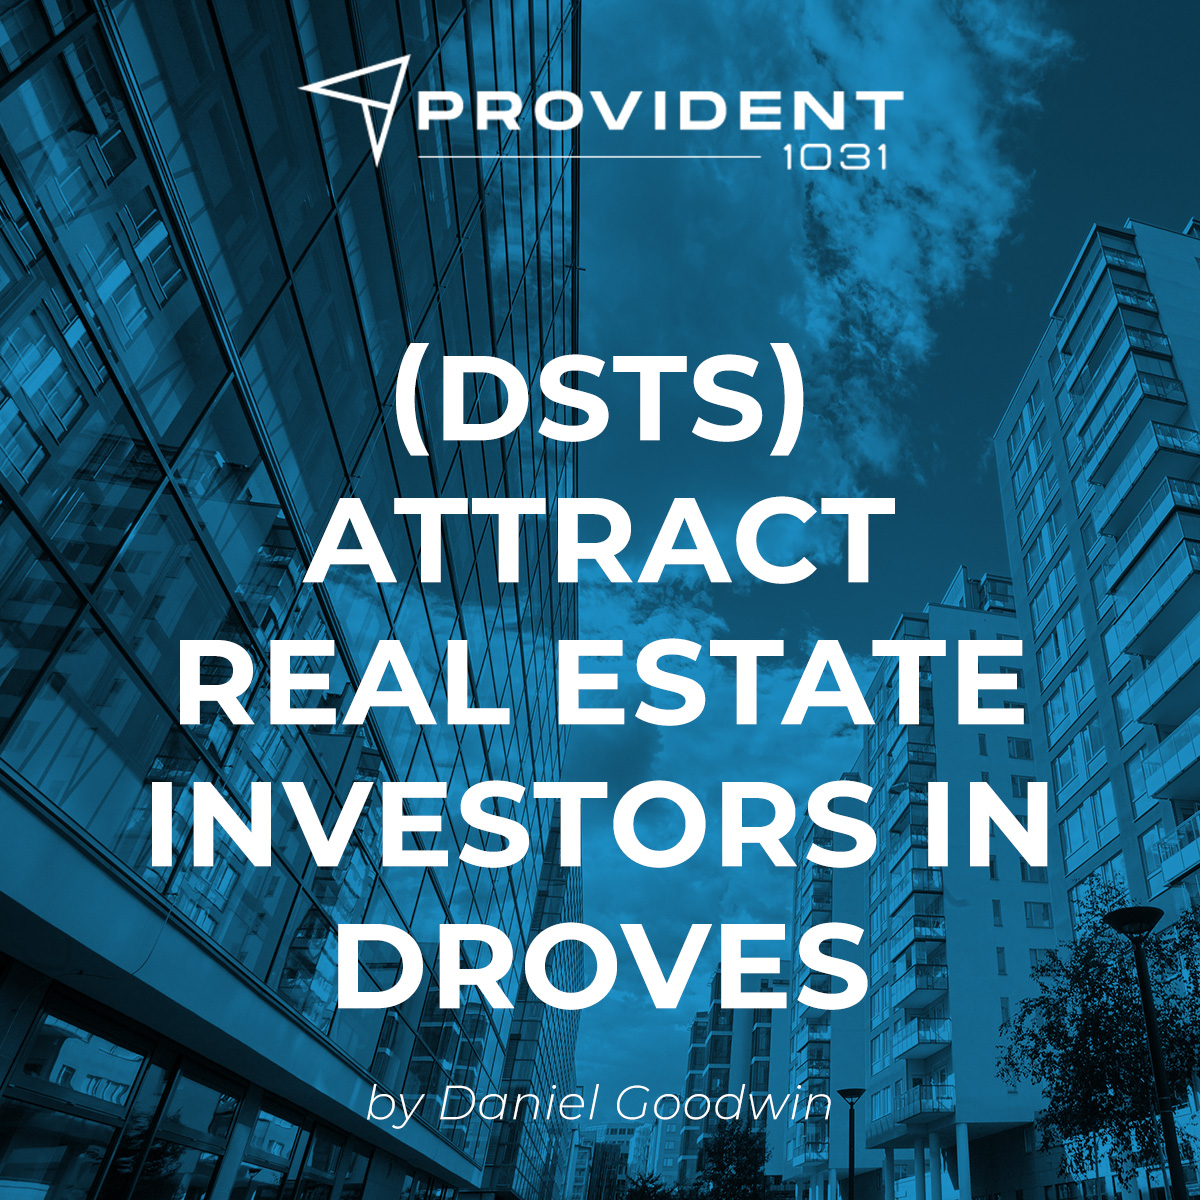 DSTs Attract Real Estate Investors in Droves